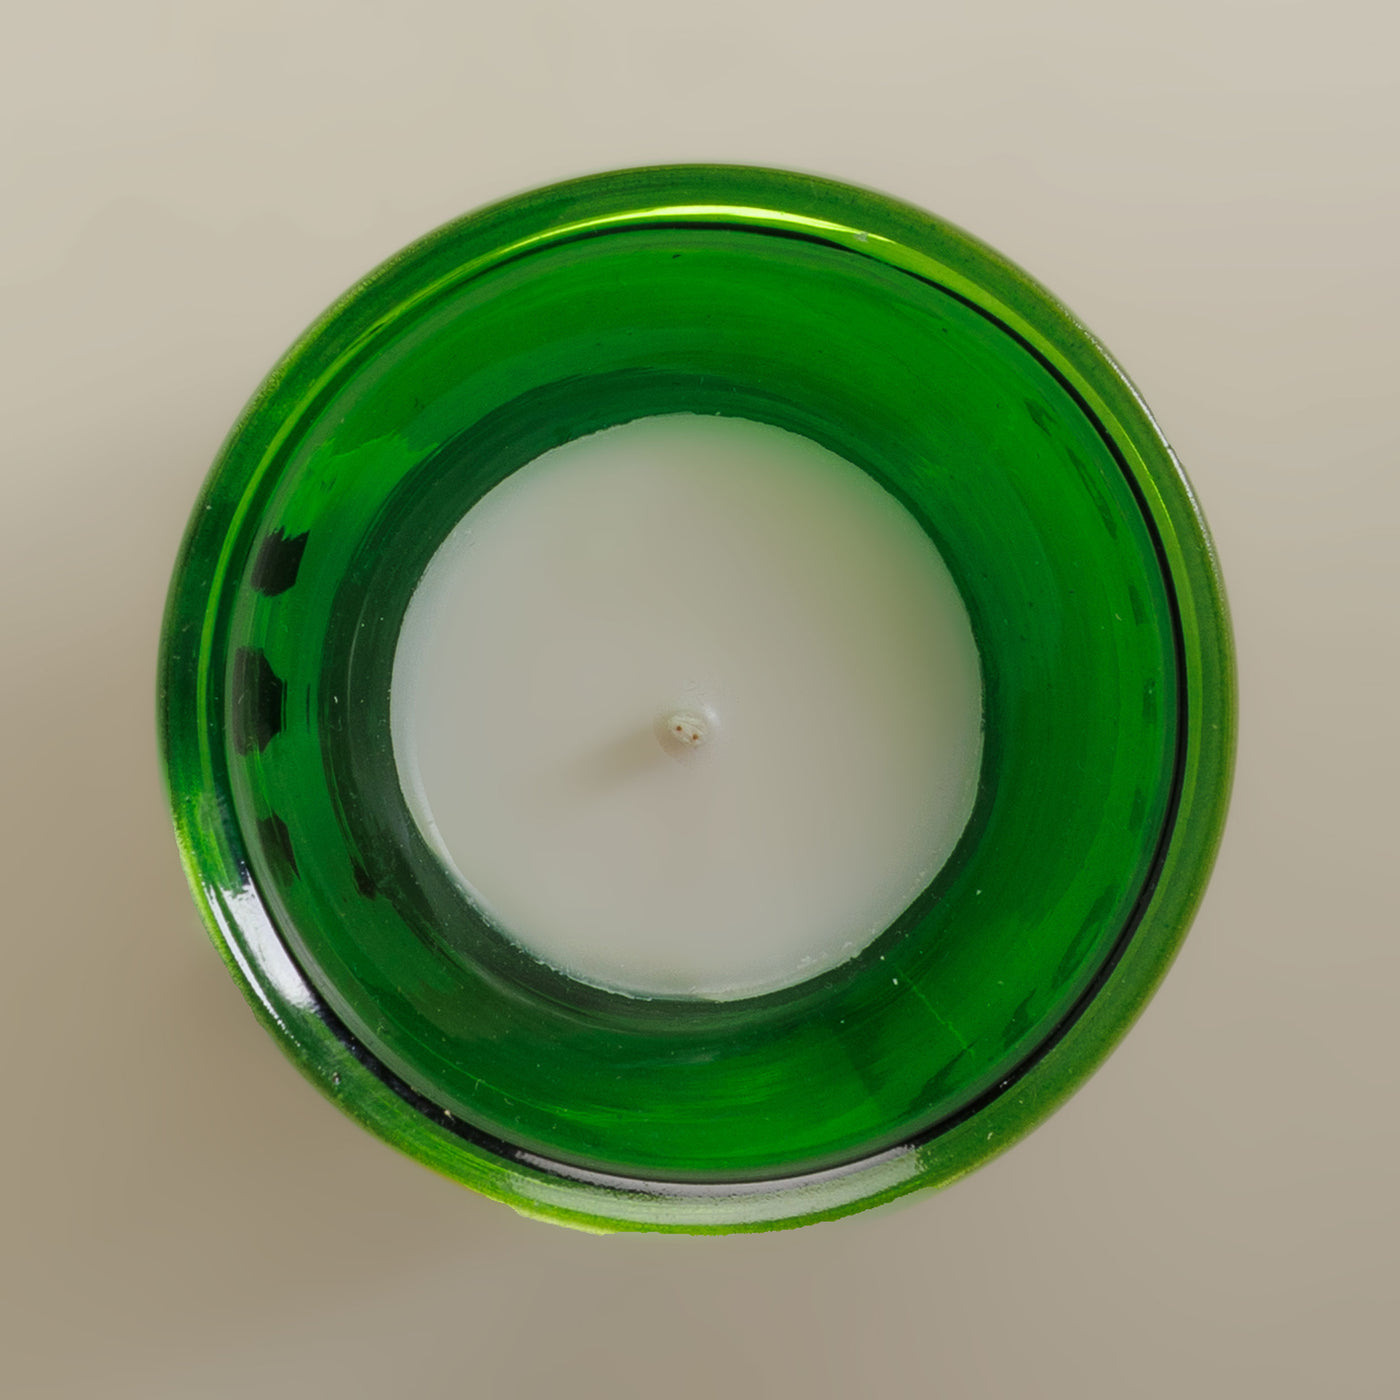 SEVA INDIA Santal Woods Petite Soy Candle with cotton wicks